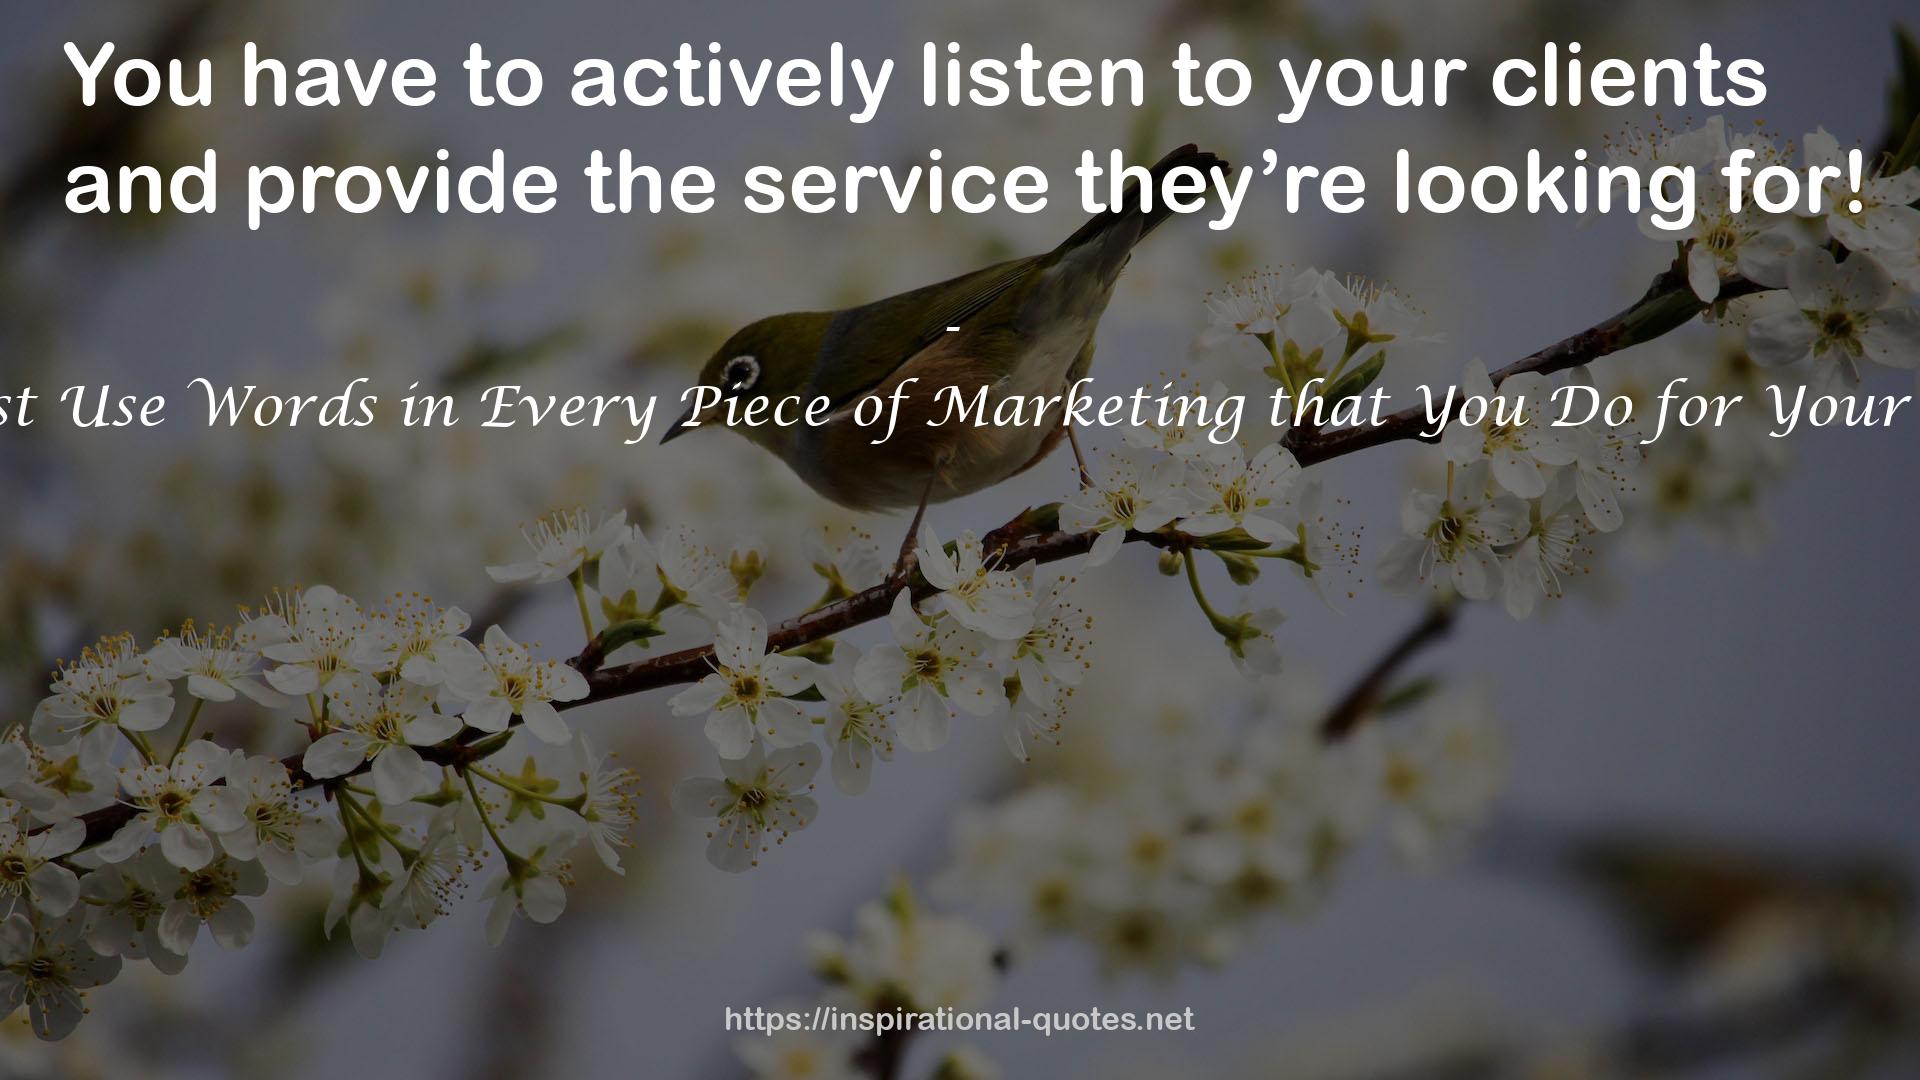 *57* Must Use Words in Every Piece of Marketing that You Do for Your Business QUOTES